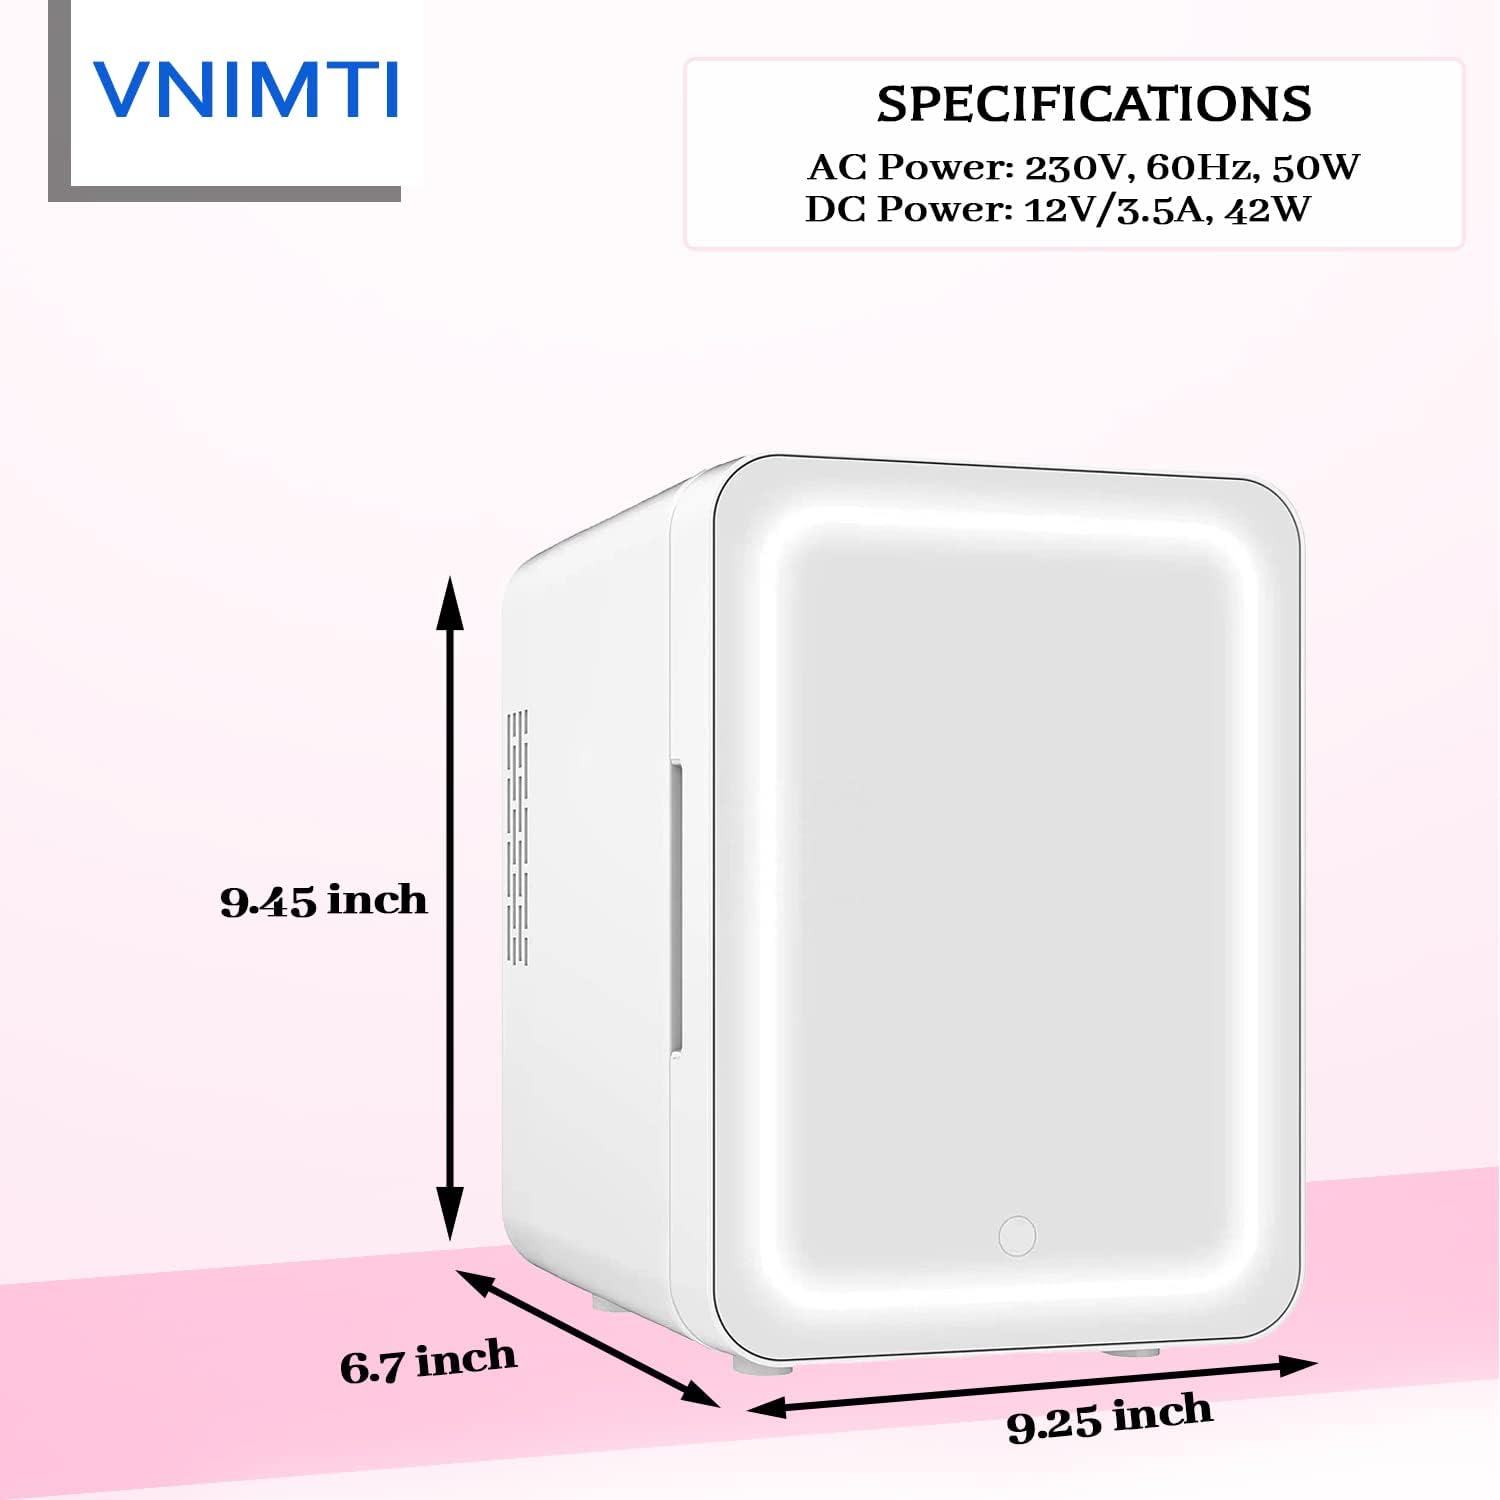 VNIMTI Mini Skin Care Fridge 4 Liter/6 Cans, Portable Beauty Fridge with Led Mirror, Small Compact Refrigerator Cooler Warmer for Dorm, Bedroom, Car, Office (4L- White)